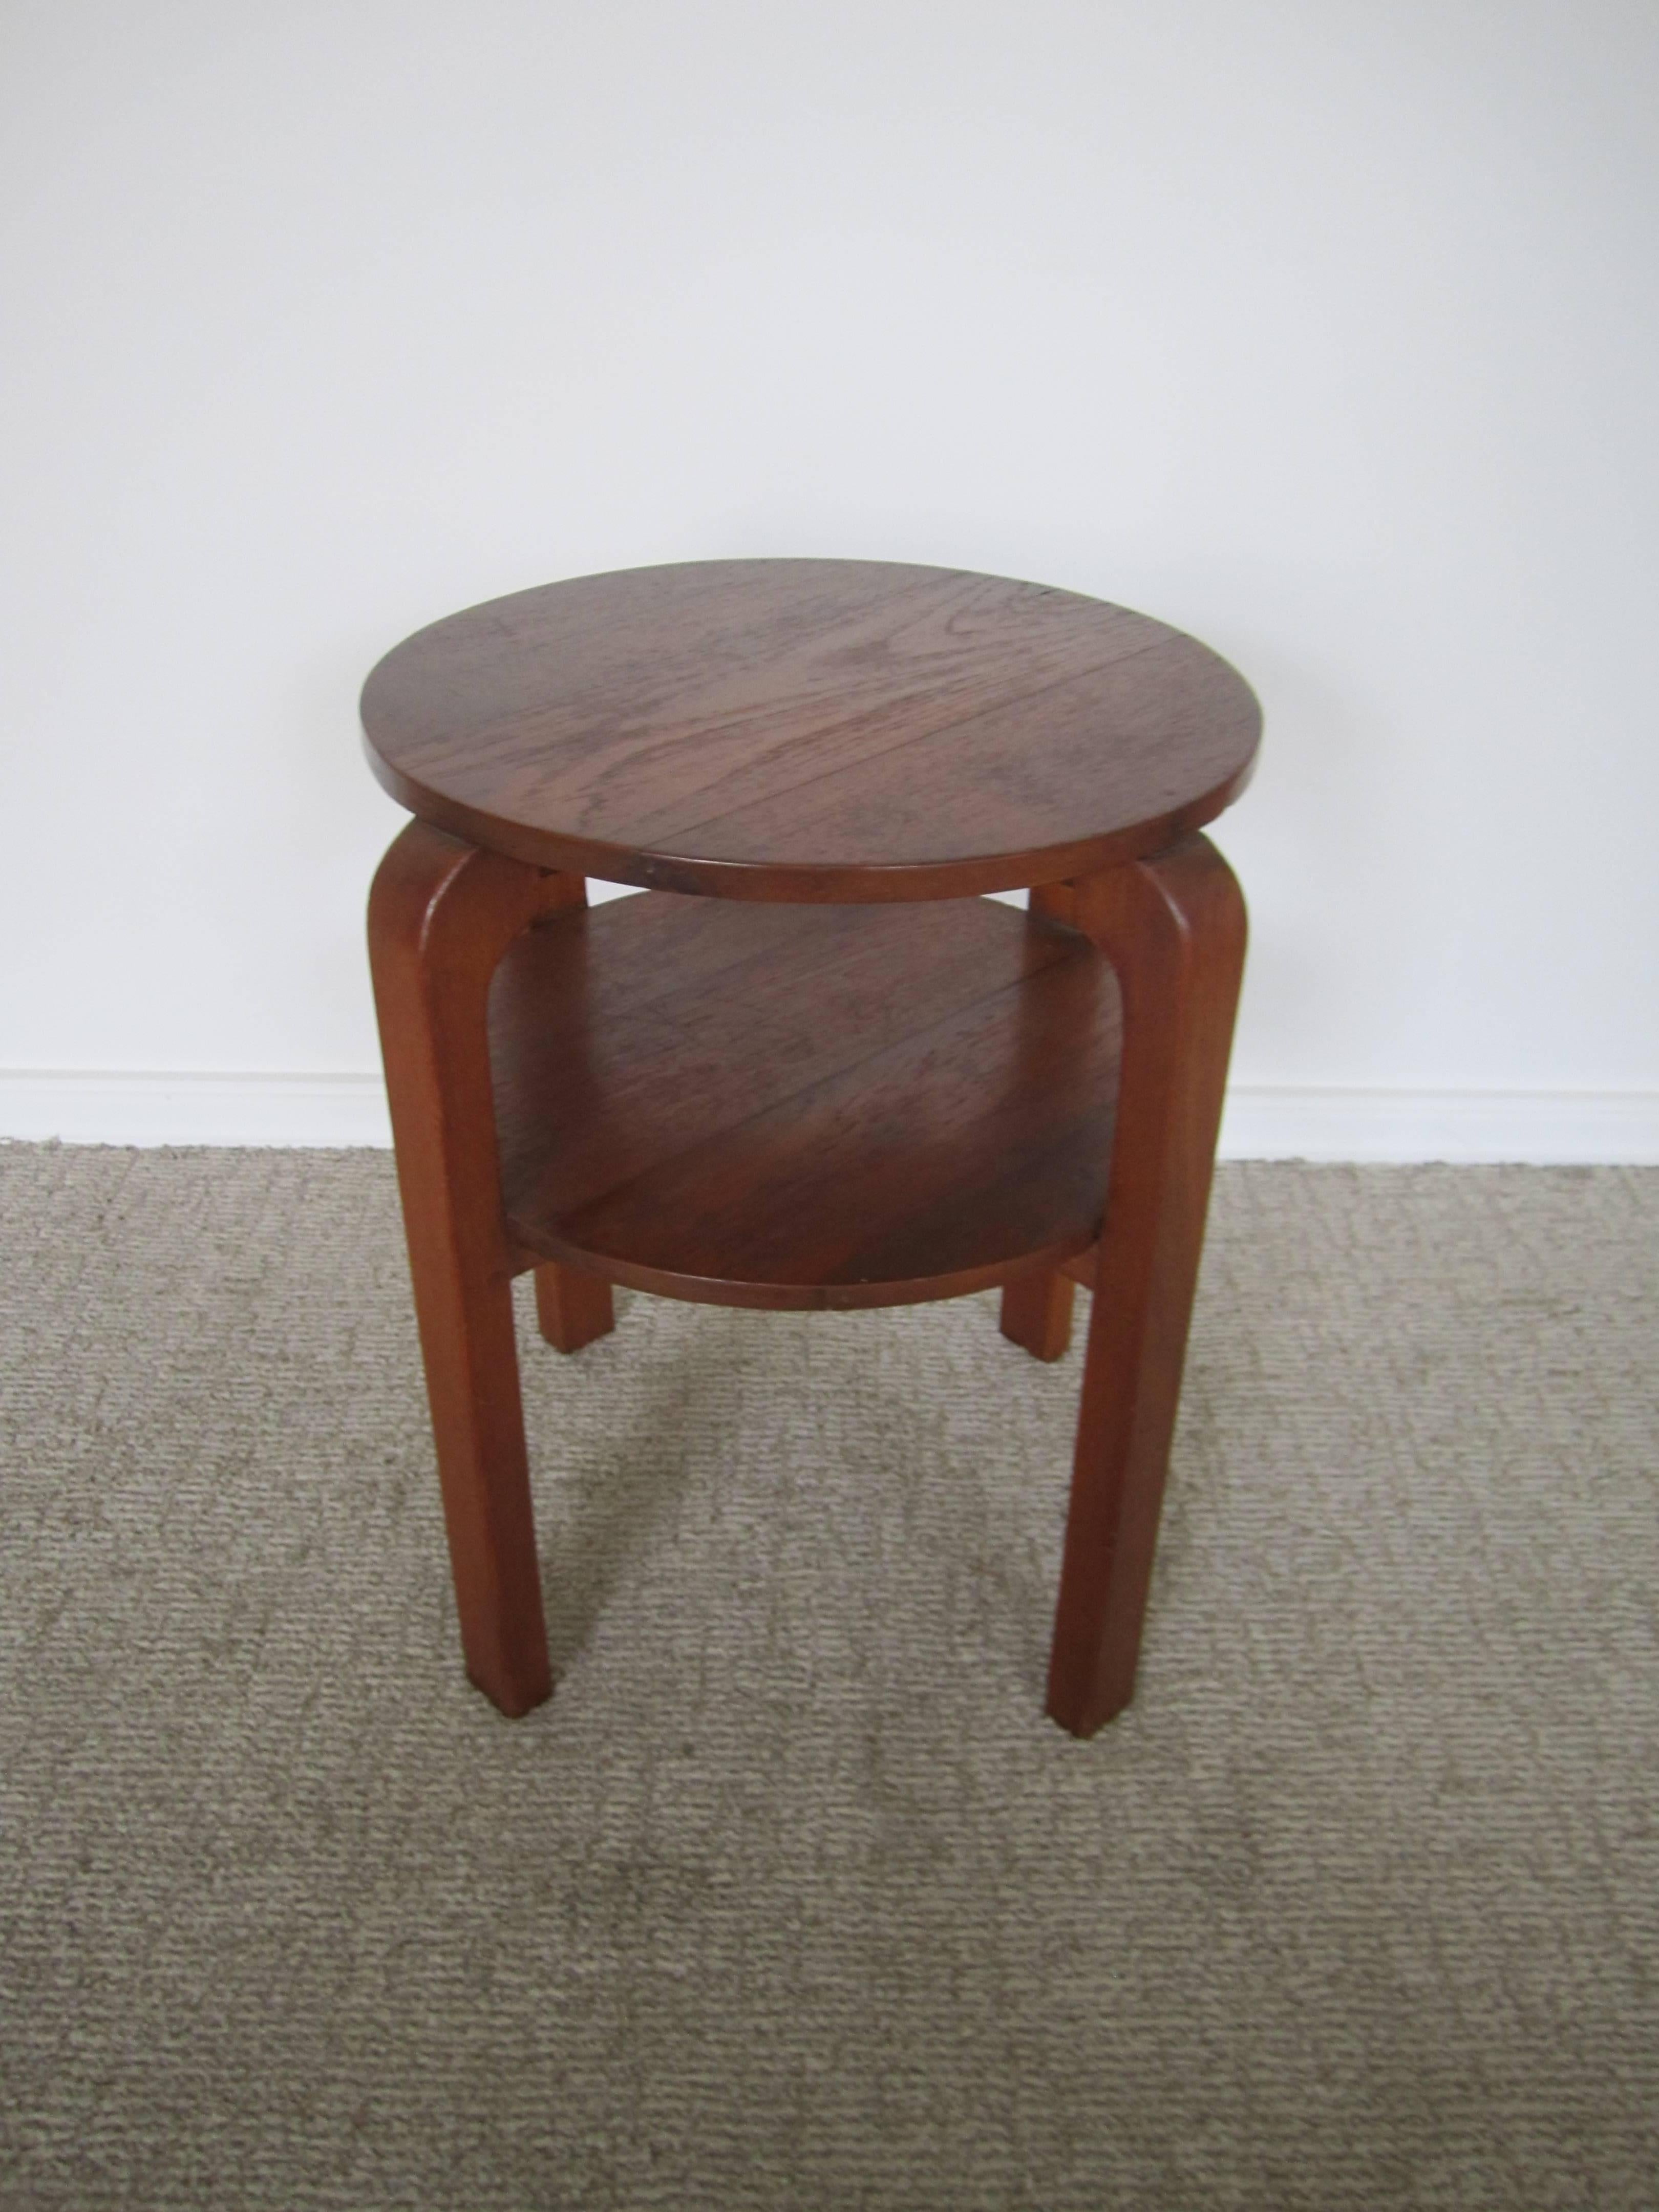 A vintage Scandinavian Modern two-tier side or occasional table in the style of Alvar Aalto. Item available here online. By request, item can be made available by appointment to the Trade (in New York.) 